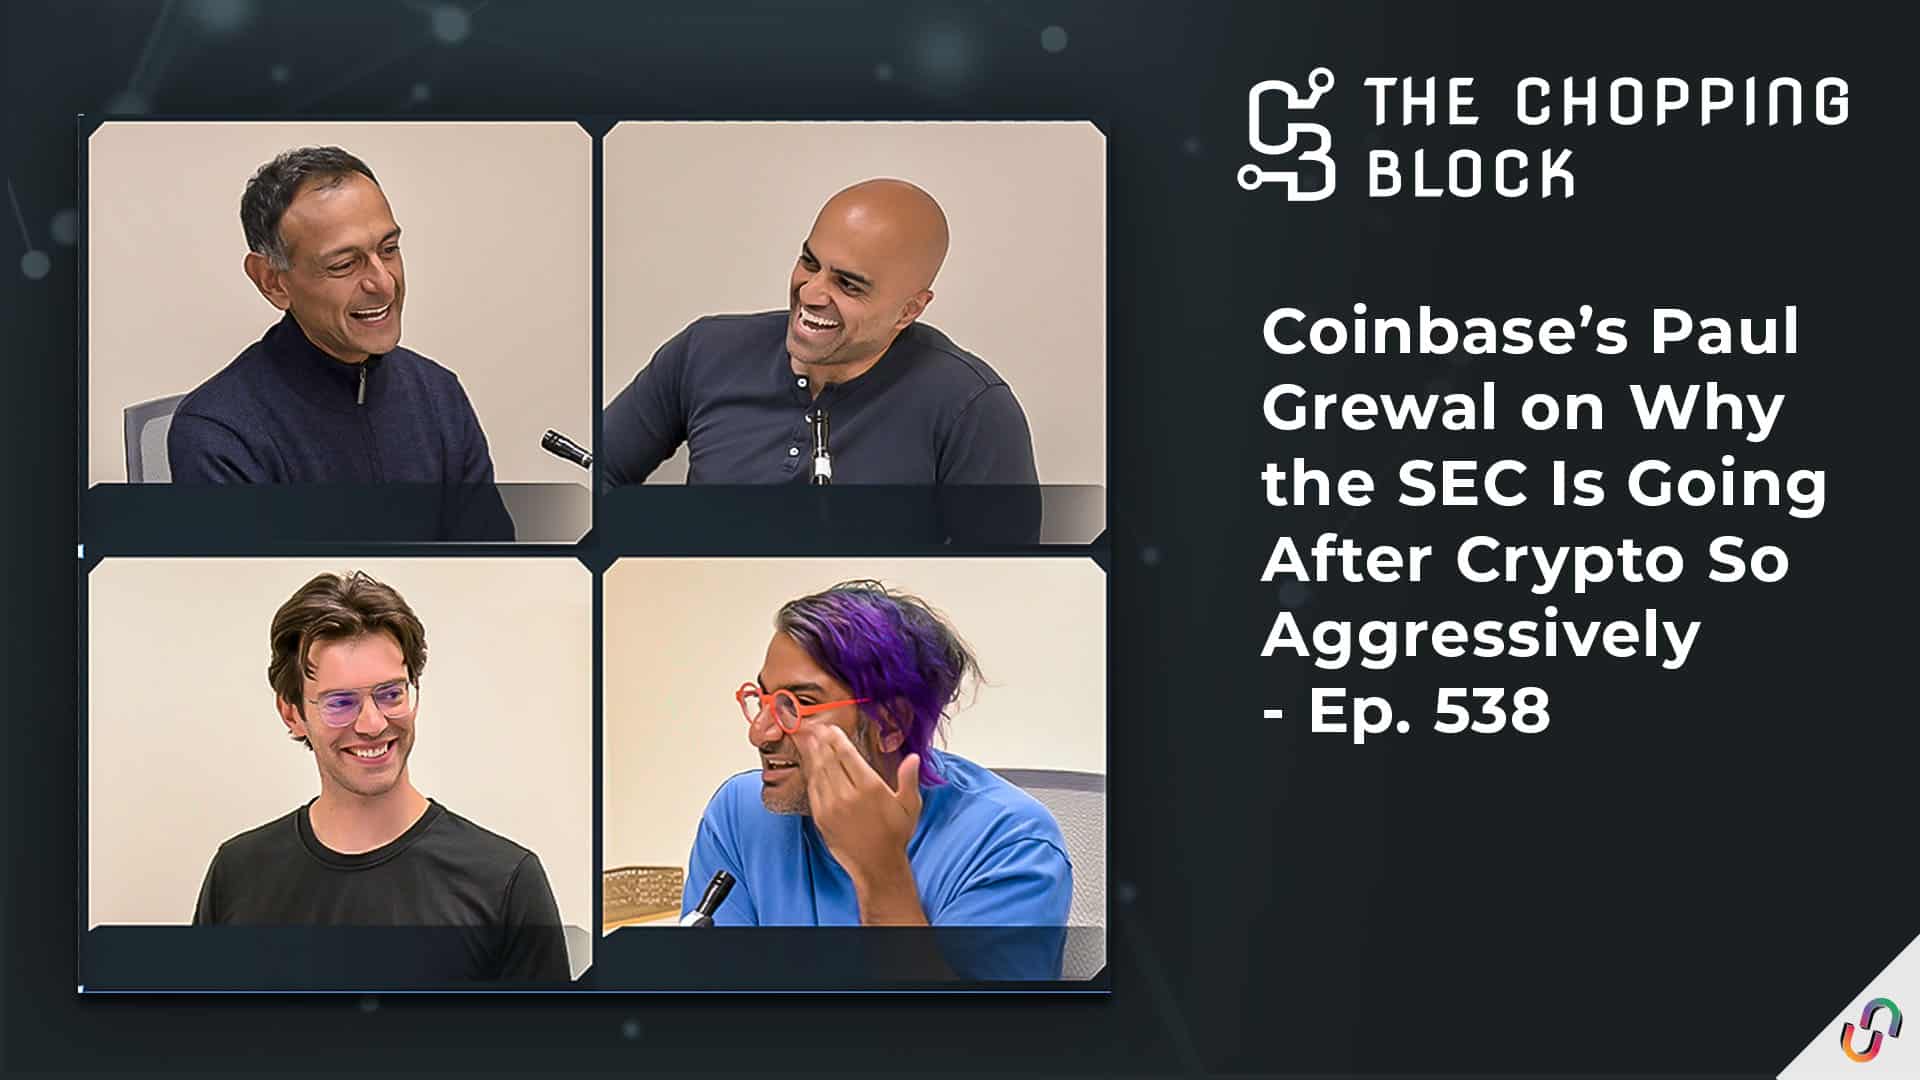 The Chopping Block: Coinbase’s Paul Grewal on Why the SEC Is Going After Crypto So Aggressively - Ep. 538